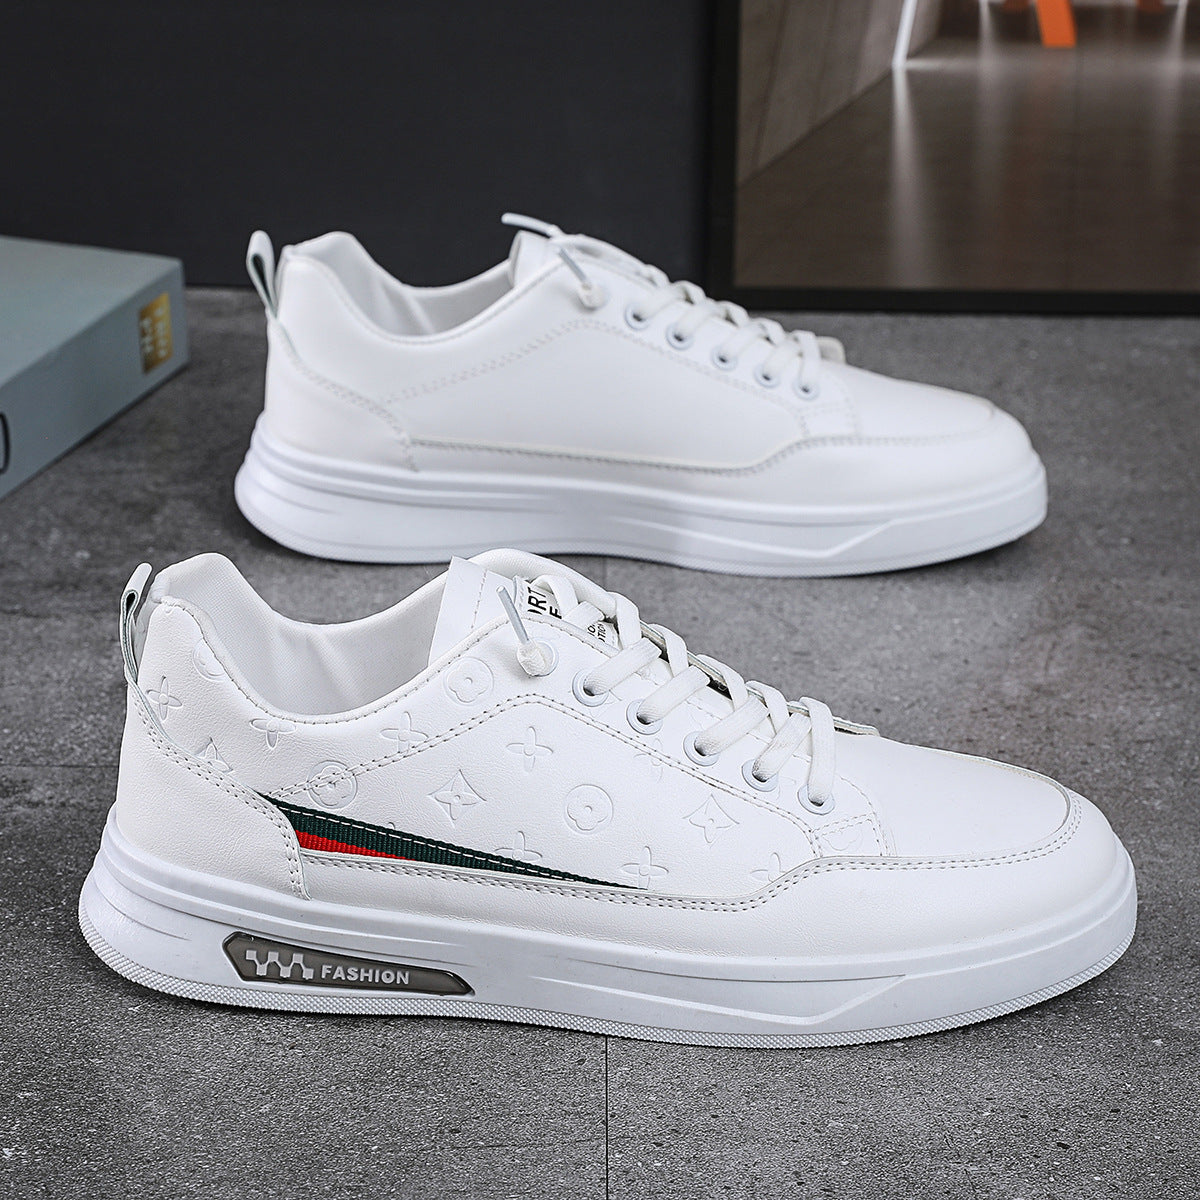 Attractive Slouchy Men's Spring Lightweight Comfortable Casual Shoes